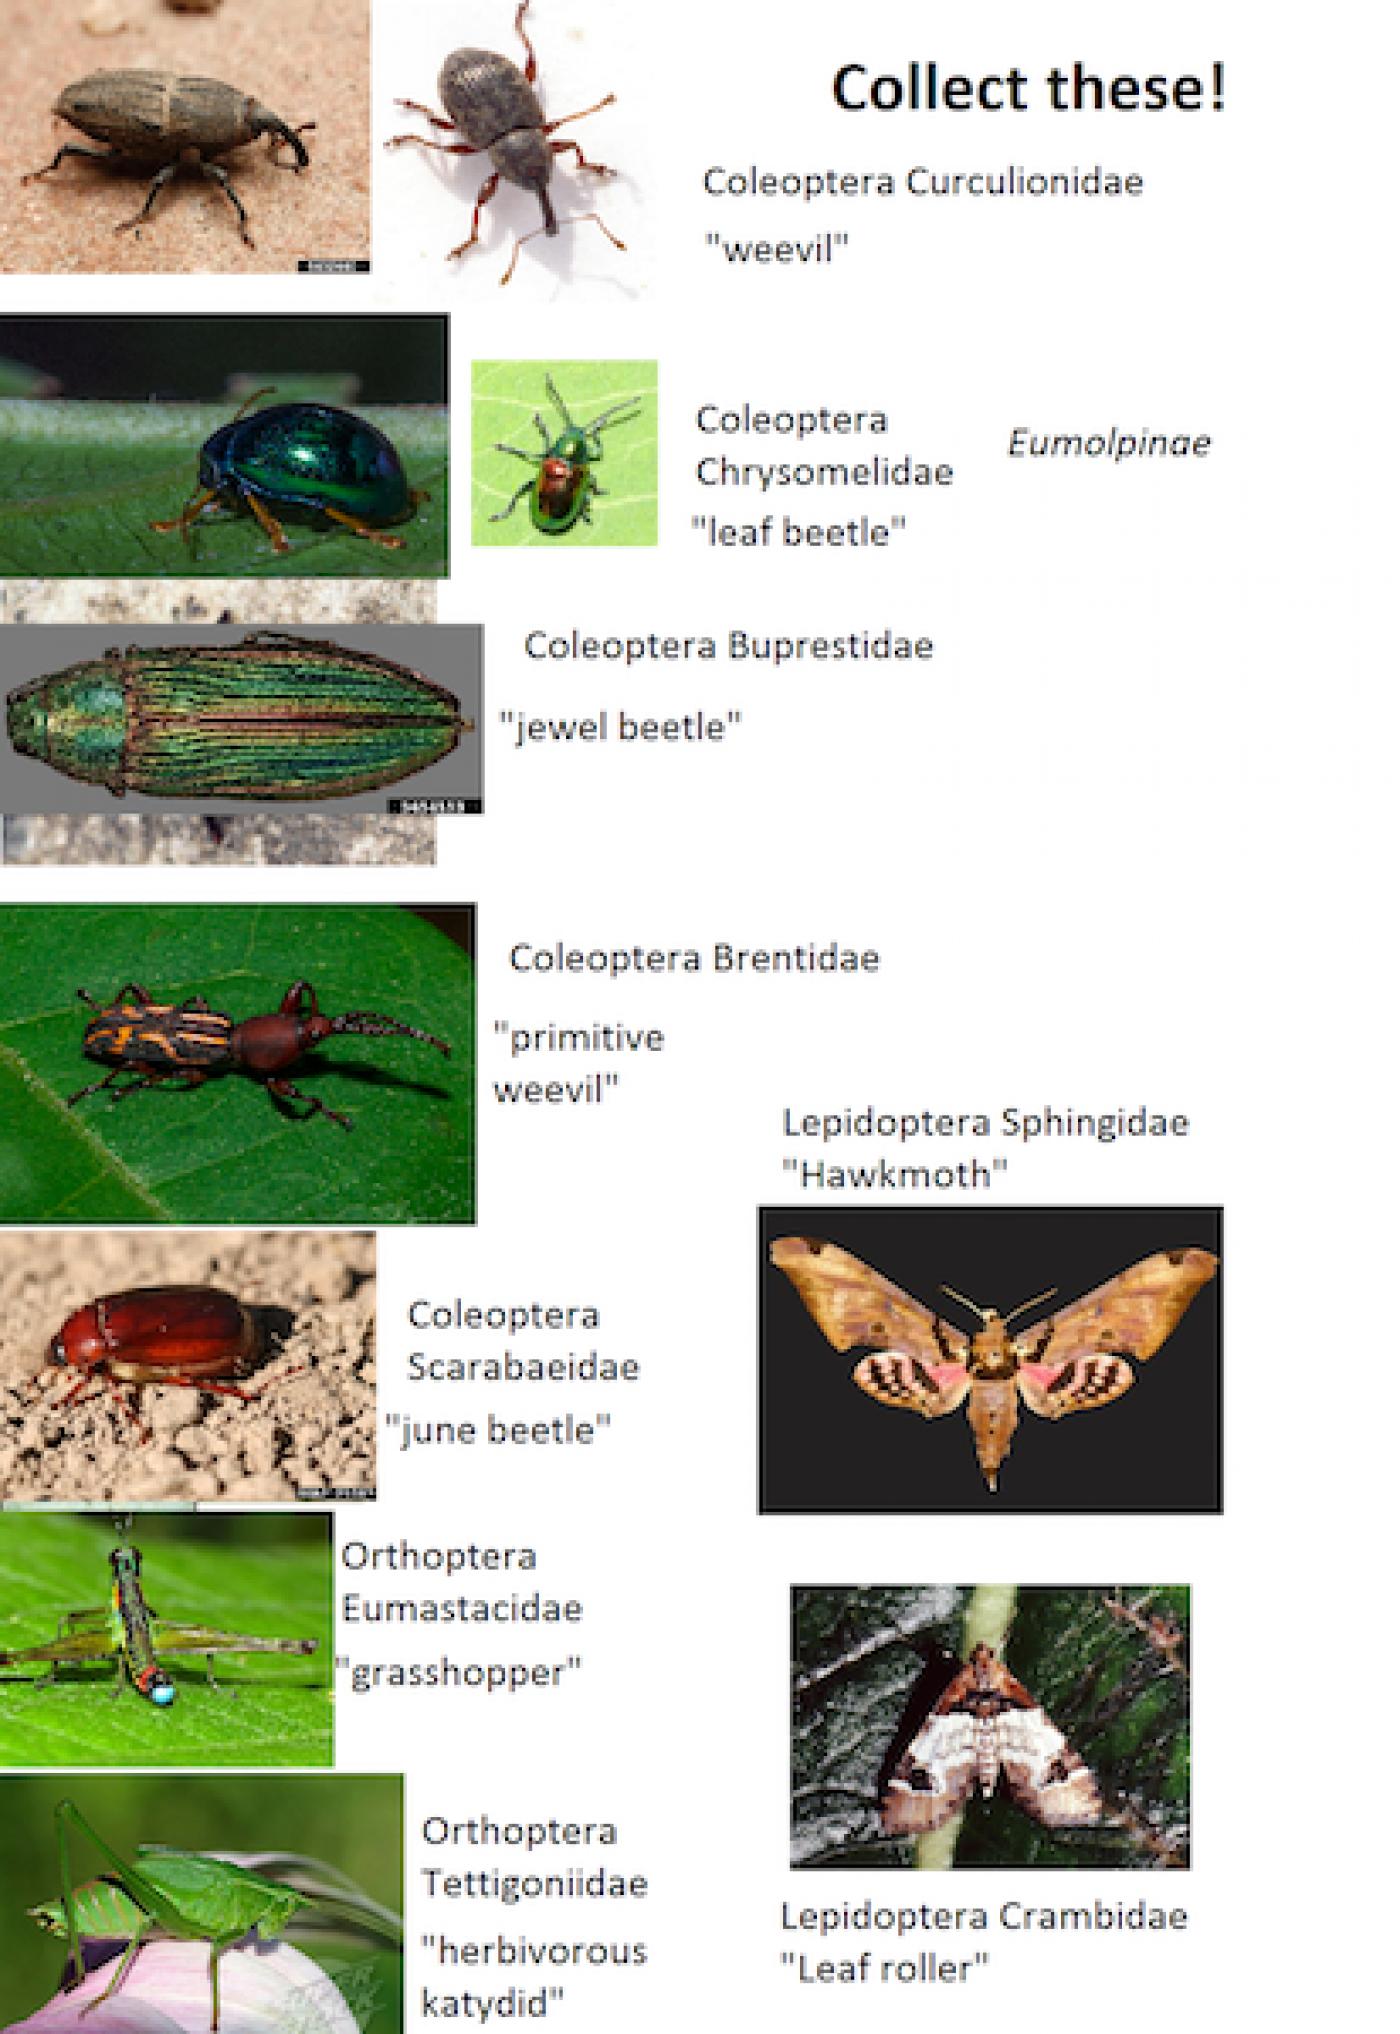 Studying Insects in Panama